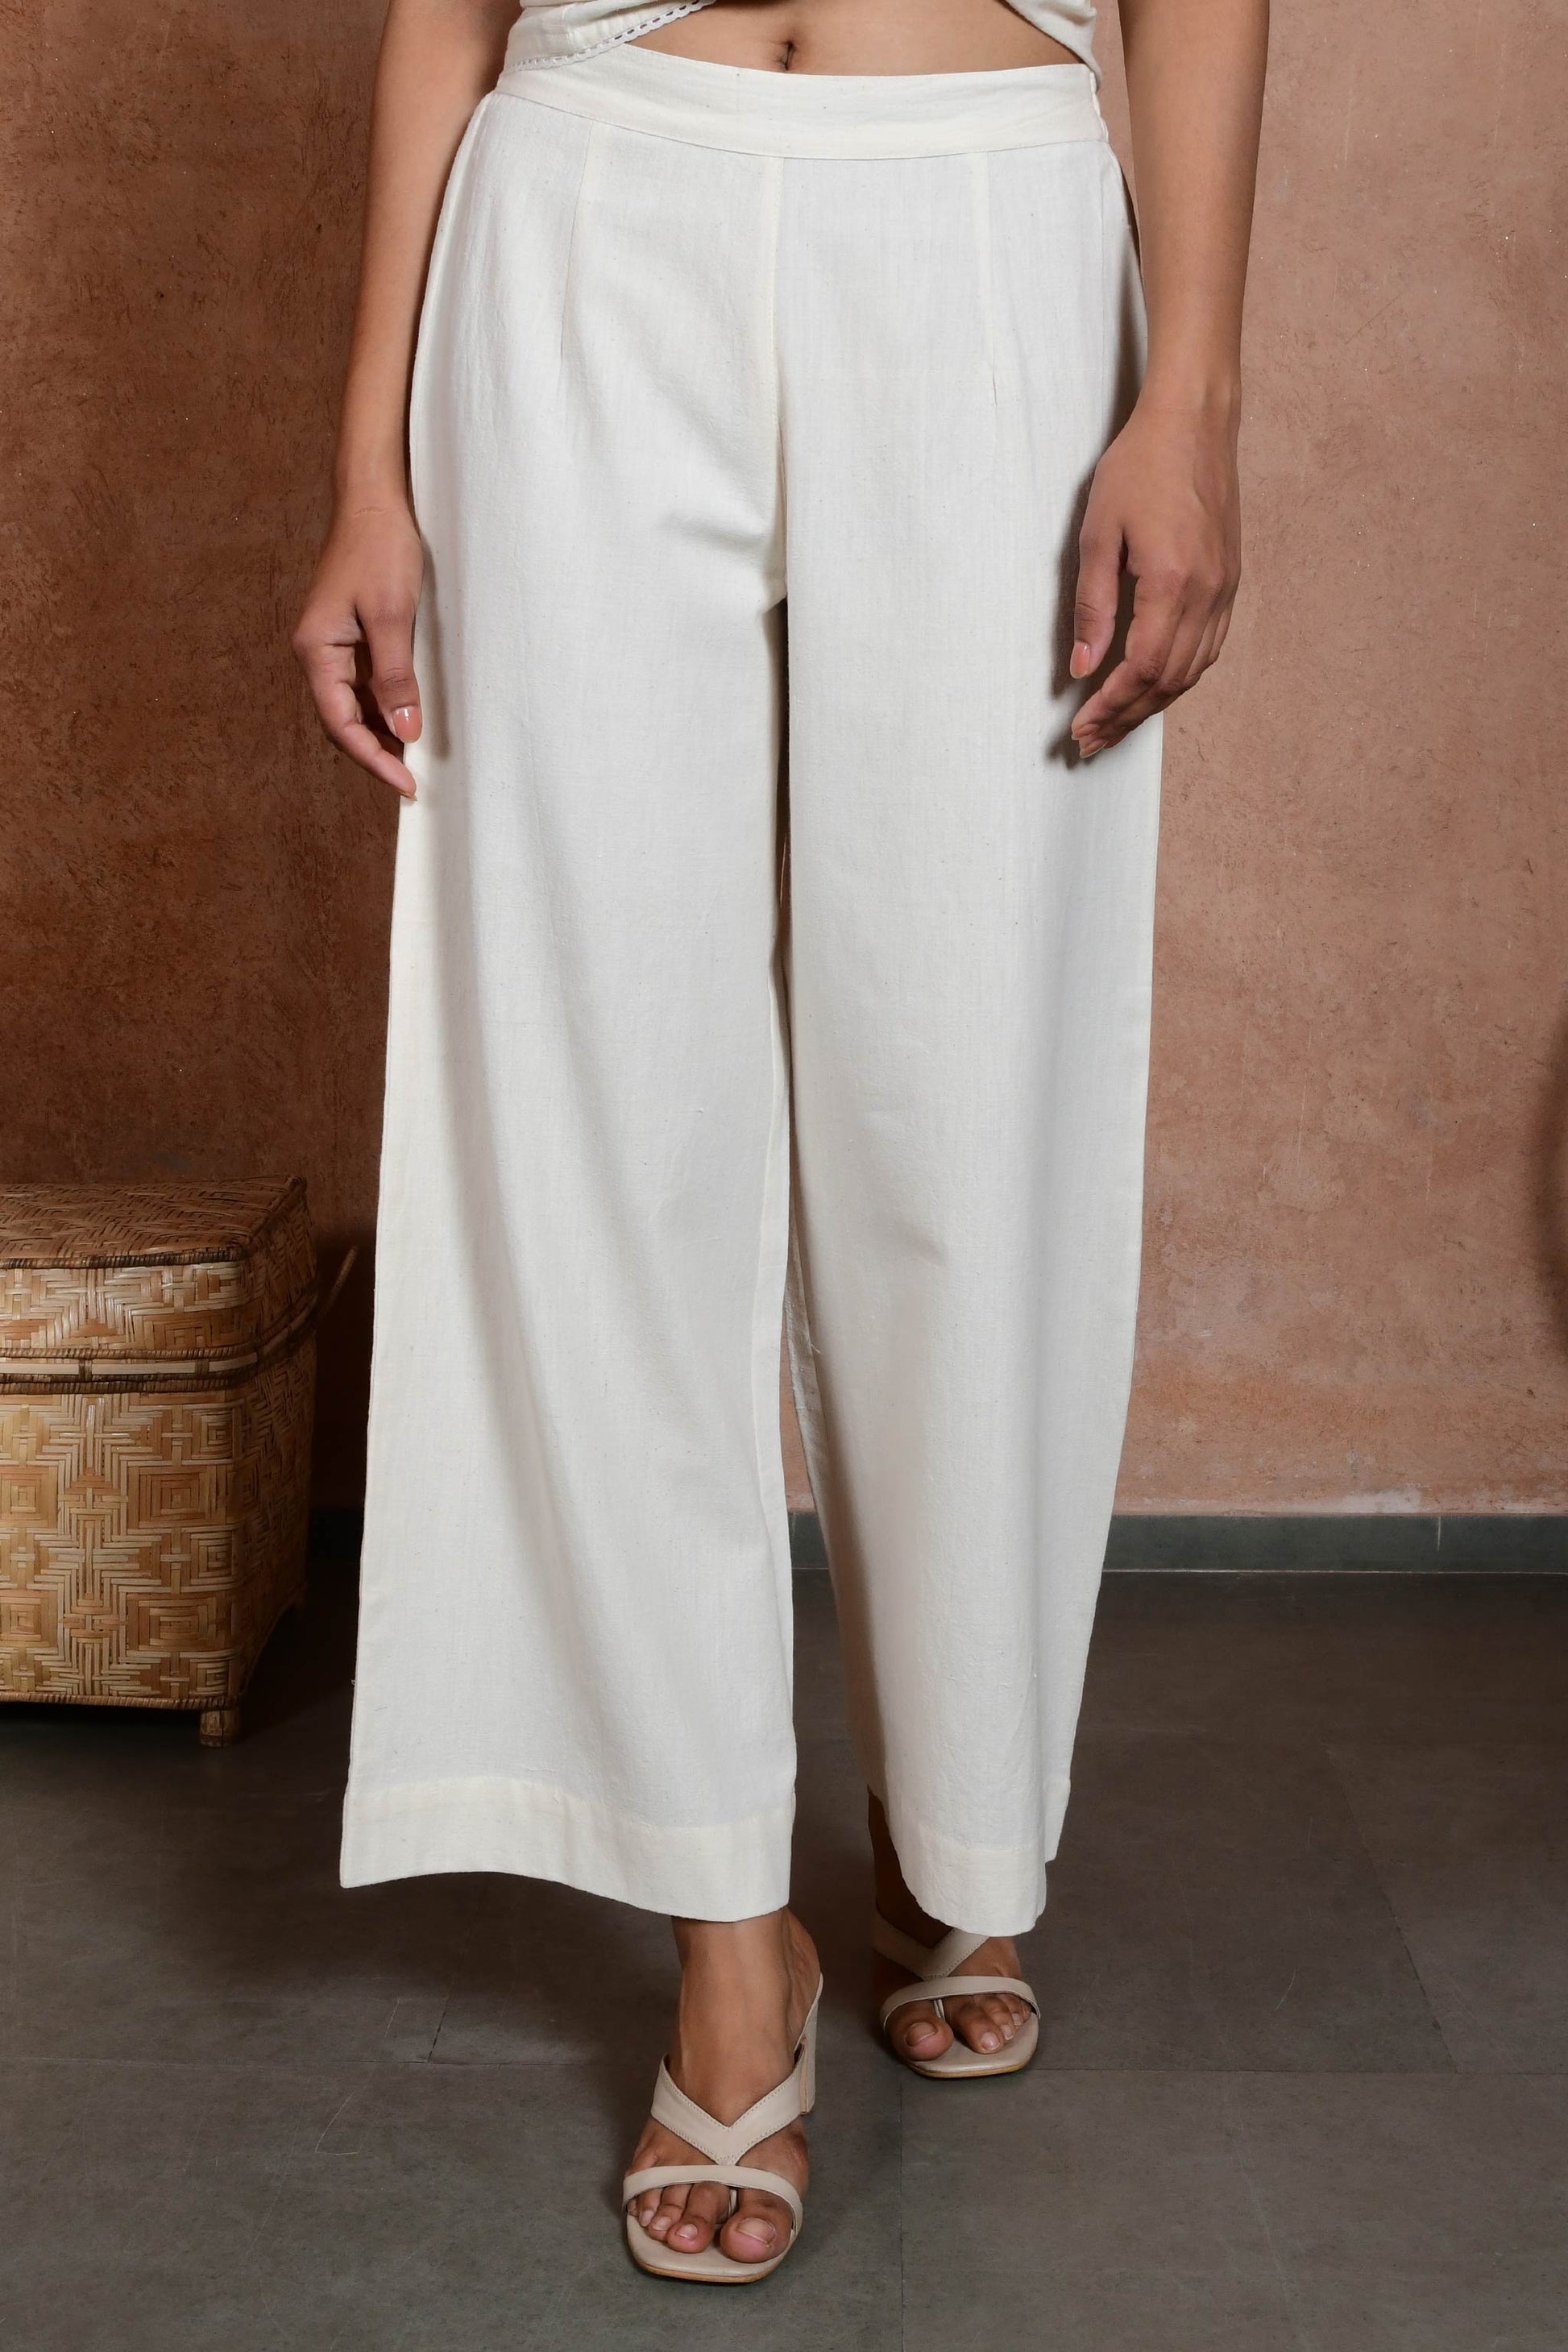 Lower half of the front pose of an indian model wearing off white straight pants.